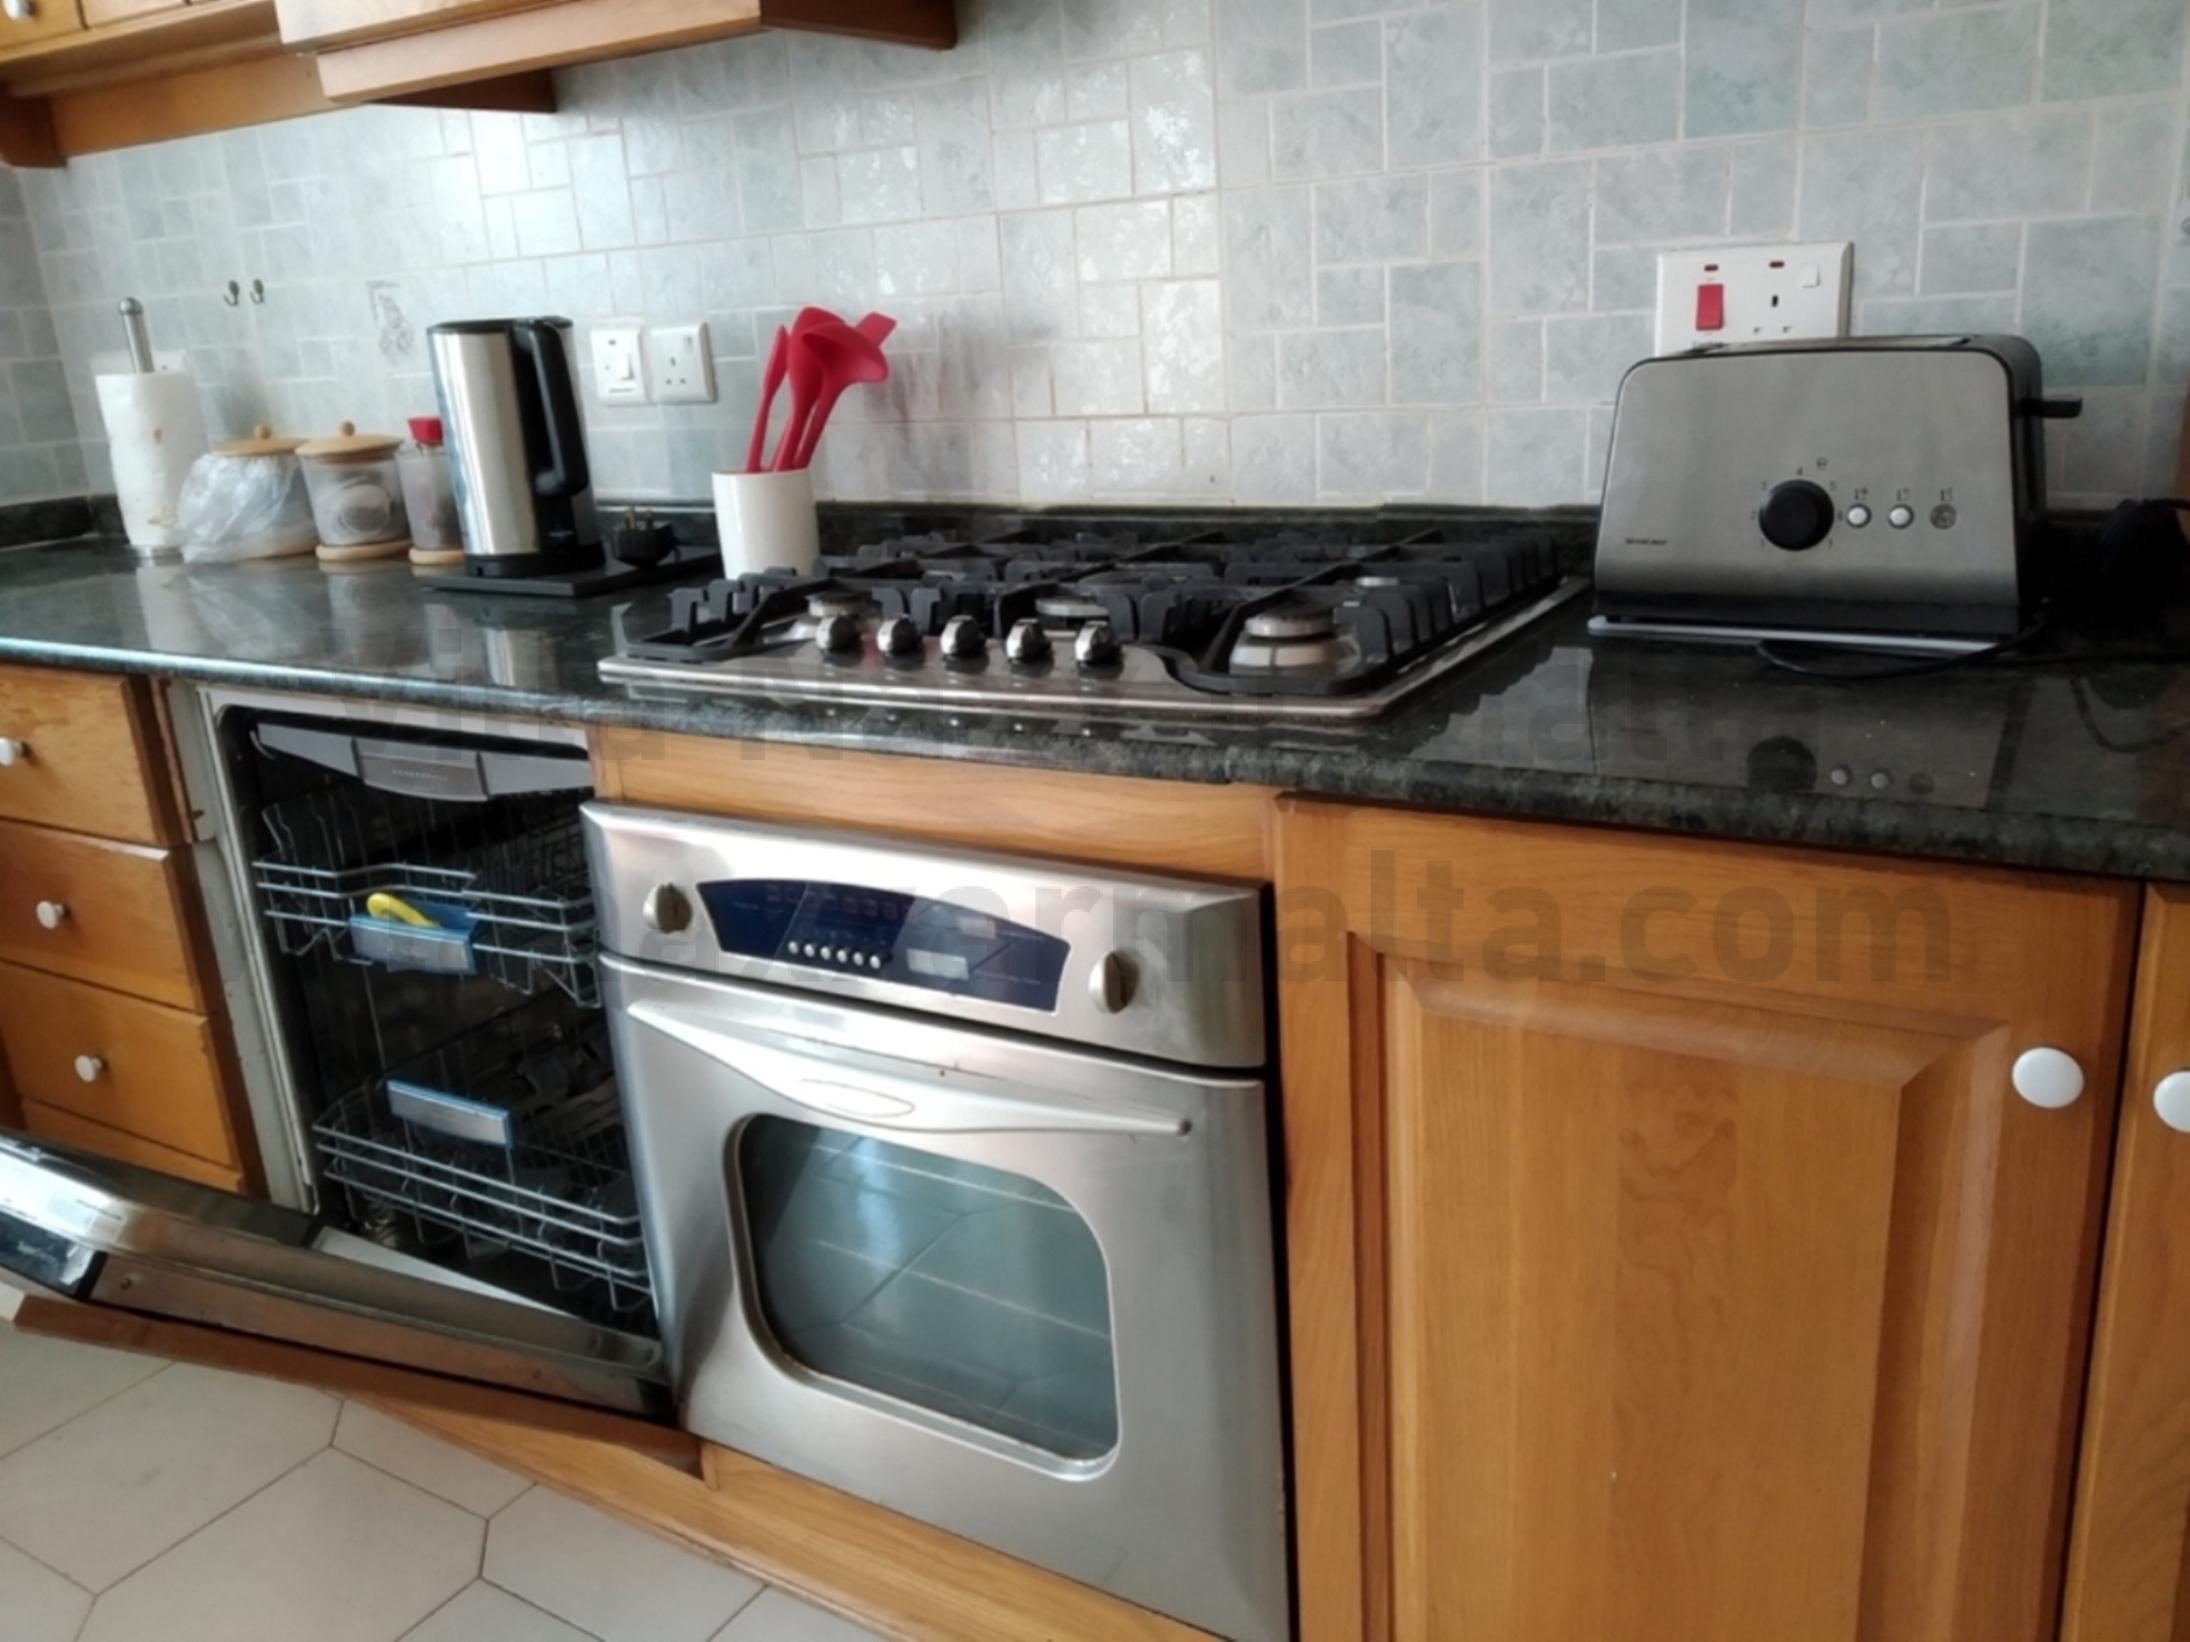 Villa Naxxar Malta – Kitchen, Dining and Living including oven/stove, microwave, dishwasher together with all the required cooking essentials, AC, WIFI and more